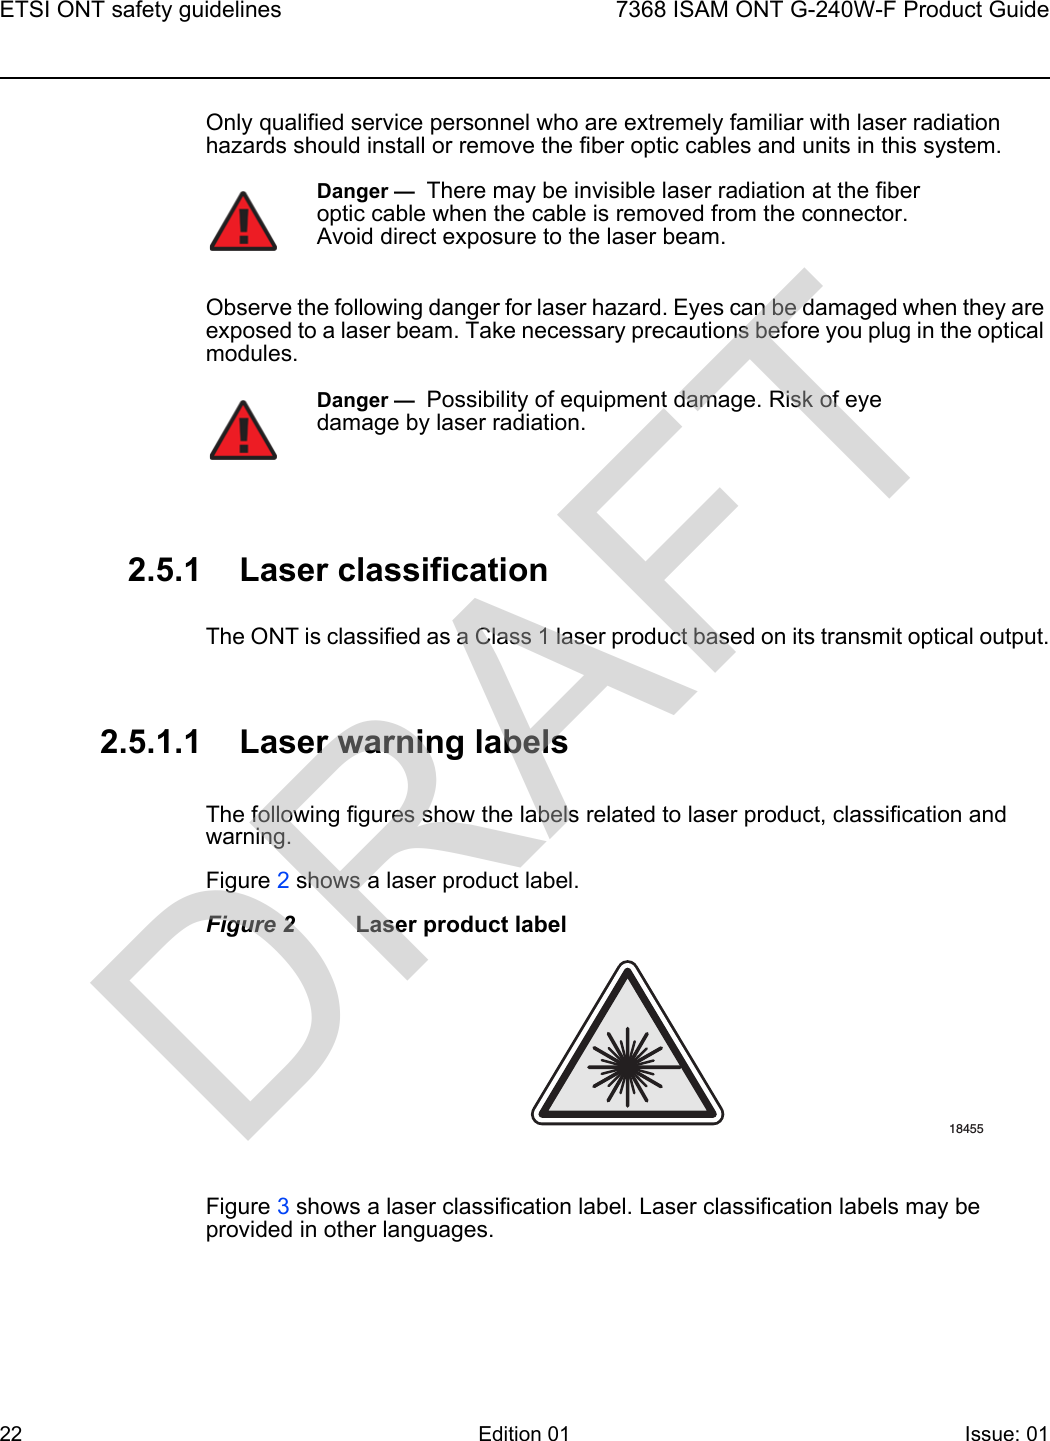 ETSI ONT safety guidelines227368 ISAM ONT G-240W-F Product GuideEdition 01 Issue: 01 Only qualified service personnel who are extremely familiar with laser radiation hazards should install or remove the fiber optic cables and units in this system.Observe the following danger for laser hazard. Eyes can be damaged when they are exposed to a laser beam. Take necessary precautions before you plug in the optical modules.2.5.1 Laser classificationThe ONT is classified as a Class 1 laser product based on its transmit optical output.2.5.1.1 Laser warning labelsThe following figures show the labels related to laser product, classification and warning. Figure 2 shows a laser product label.Figure 2 Laser product labelFigure 3 shows a laser classification label. Laser classification labels may be provided in other languages.Danger —  There may be invisible laser radiation at the fiber optic cable when the cable is removed from the connector. Avoid direct exposure to the laser beam.Danger —  Possibility of equipment damage. Risk of eye damage by laser radiation.18455DRAFT